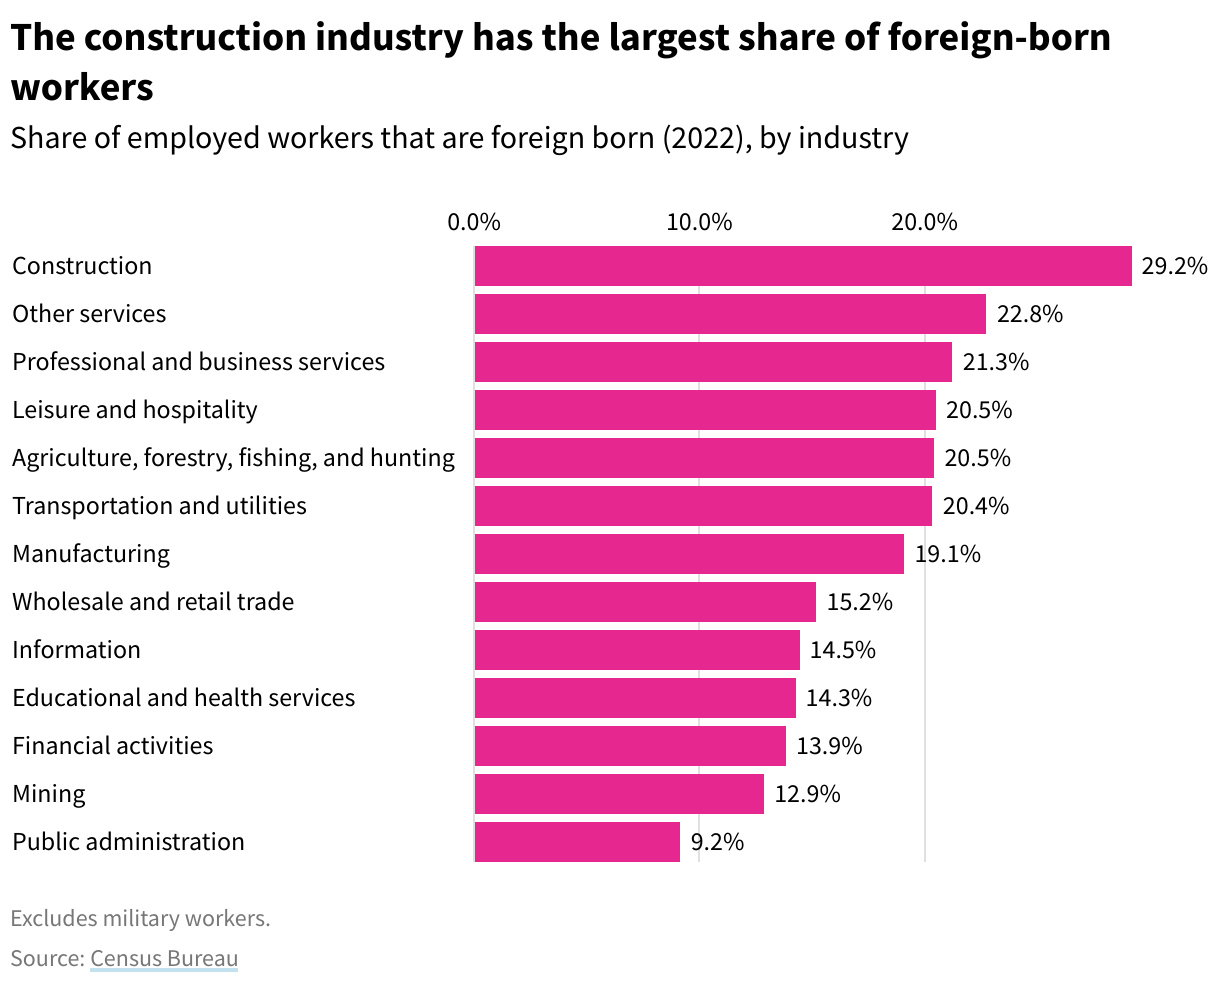 A bar chart of the share of foreign-born workers per industry with construction being the largest share